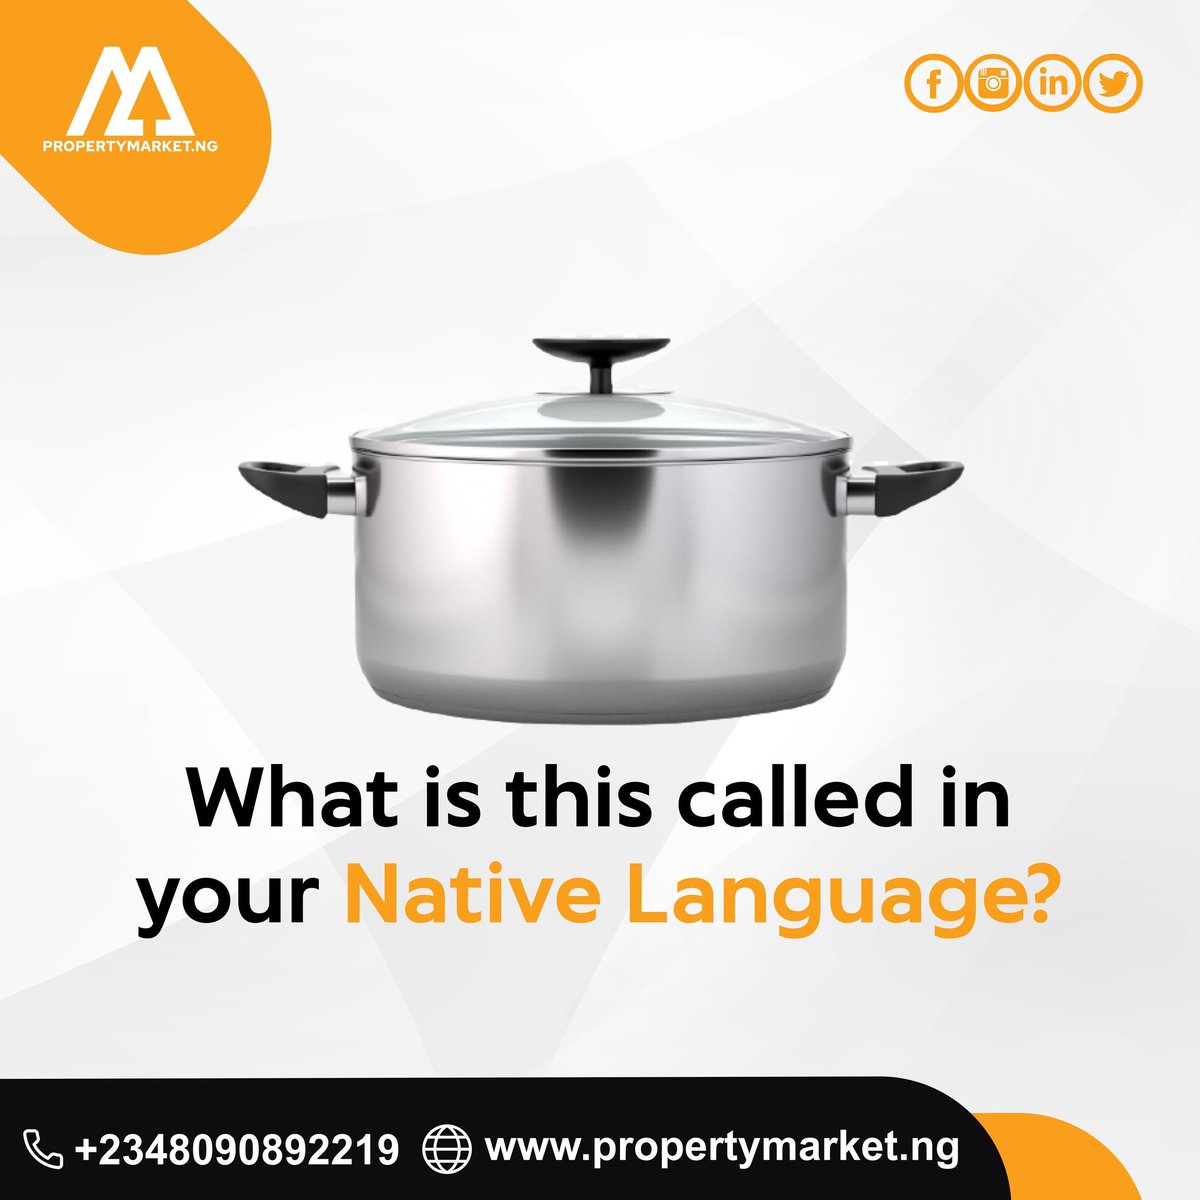 What do you call a cooking pot in your Native language?
Let's see your answers in the comment section.
.
.
#hustlersquare #celebritiesinnigeria #entrepreneur #buylandinnigeria #victoriaisland #realestatelagos #realestatenews #surulere #nigerianinusa #landowner #landowners